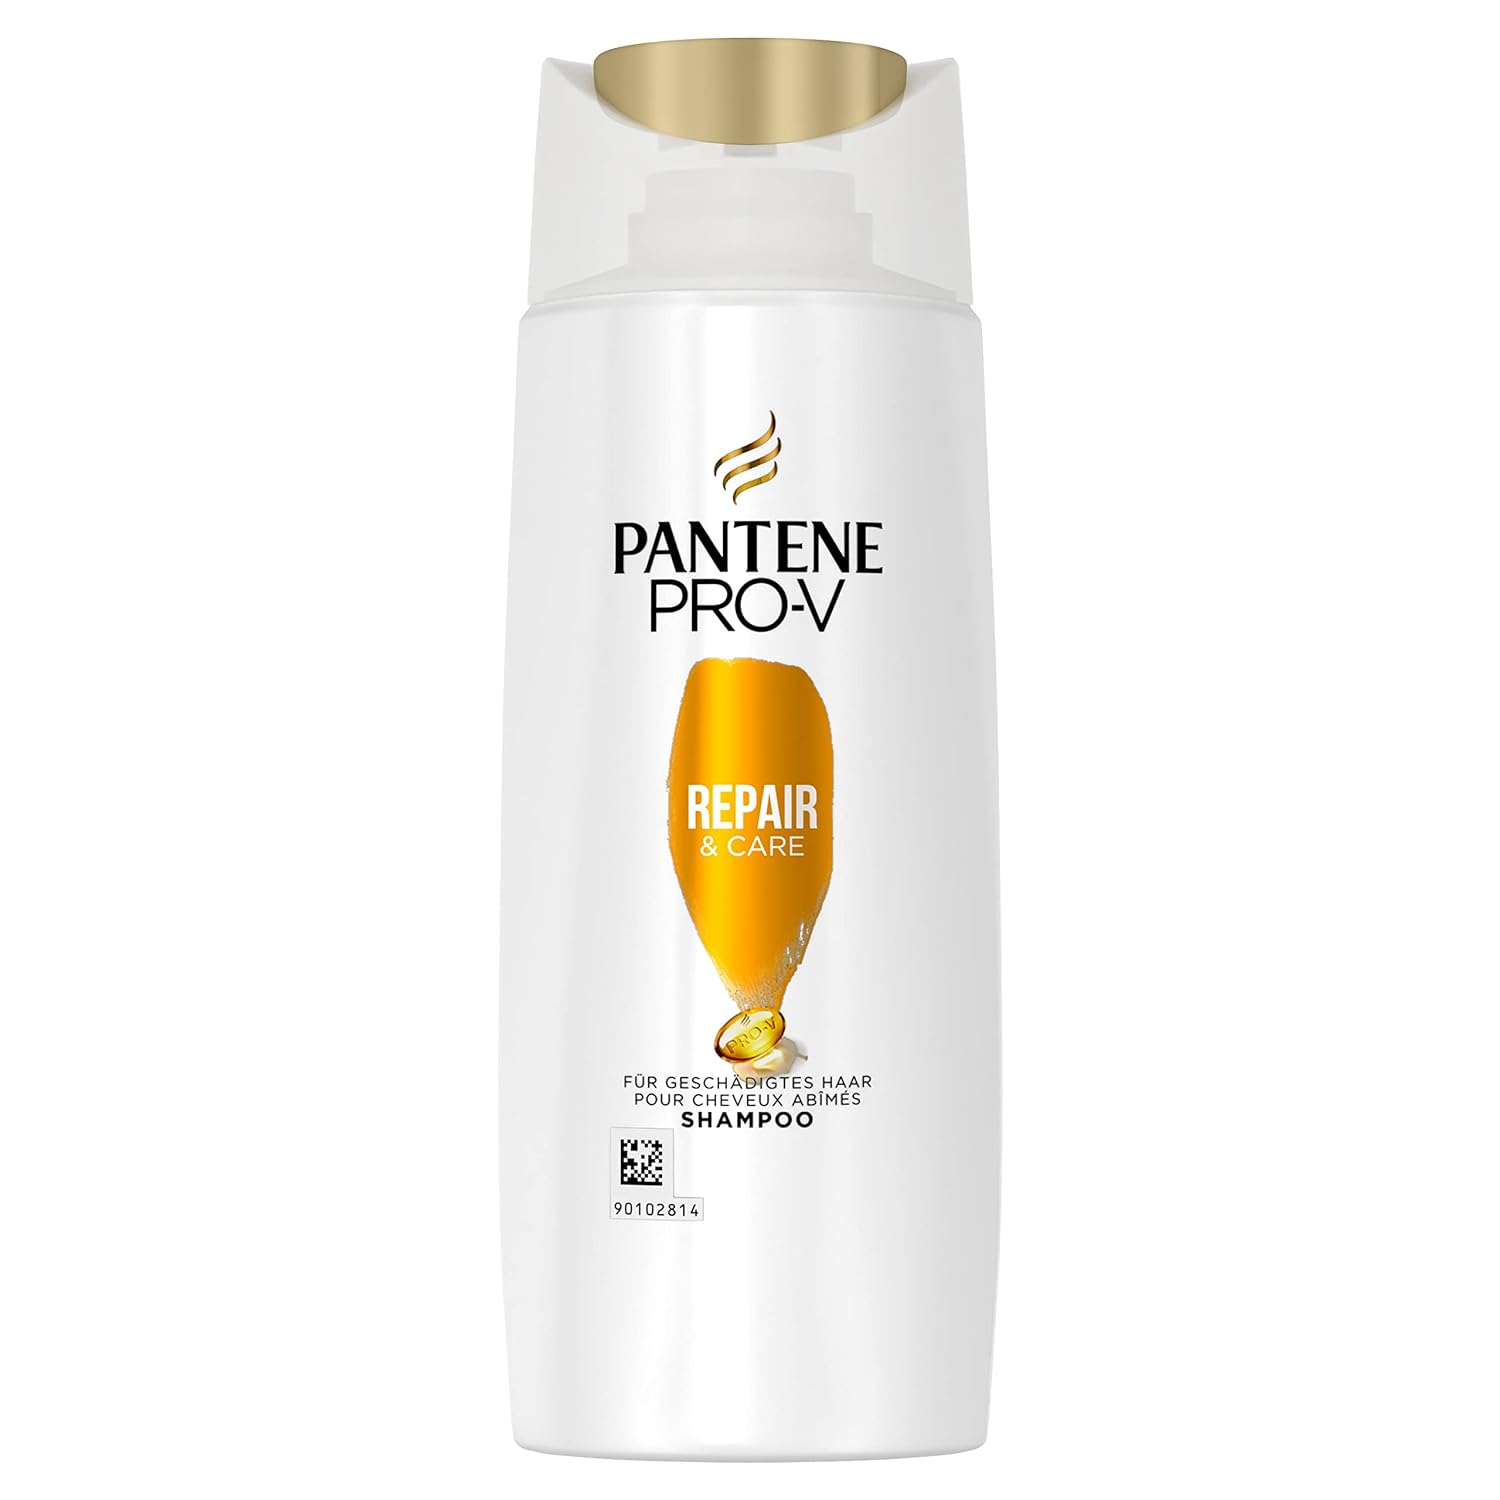 Pantene Pro-V Repair and Care Shampoo for Damaged Hair